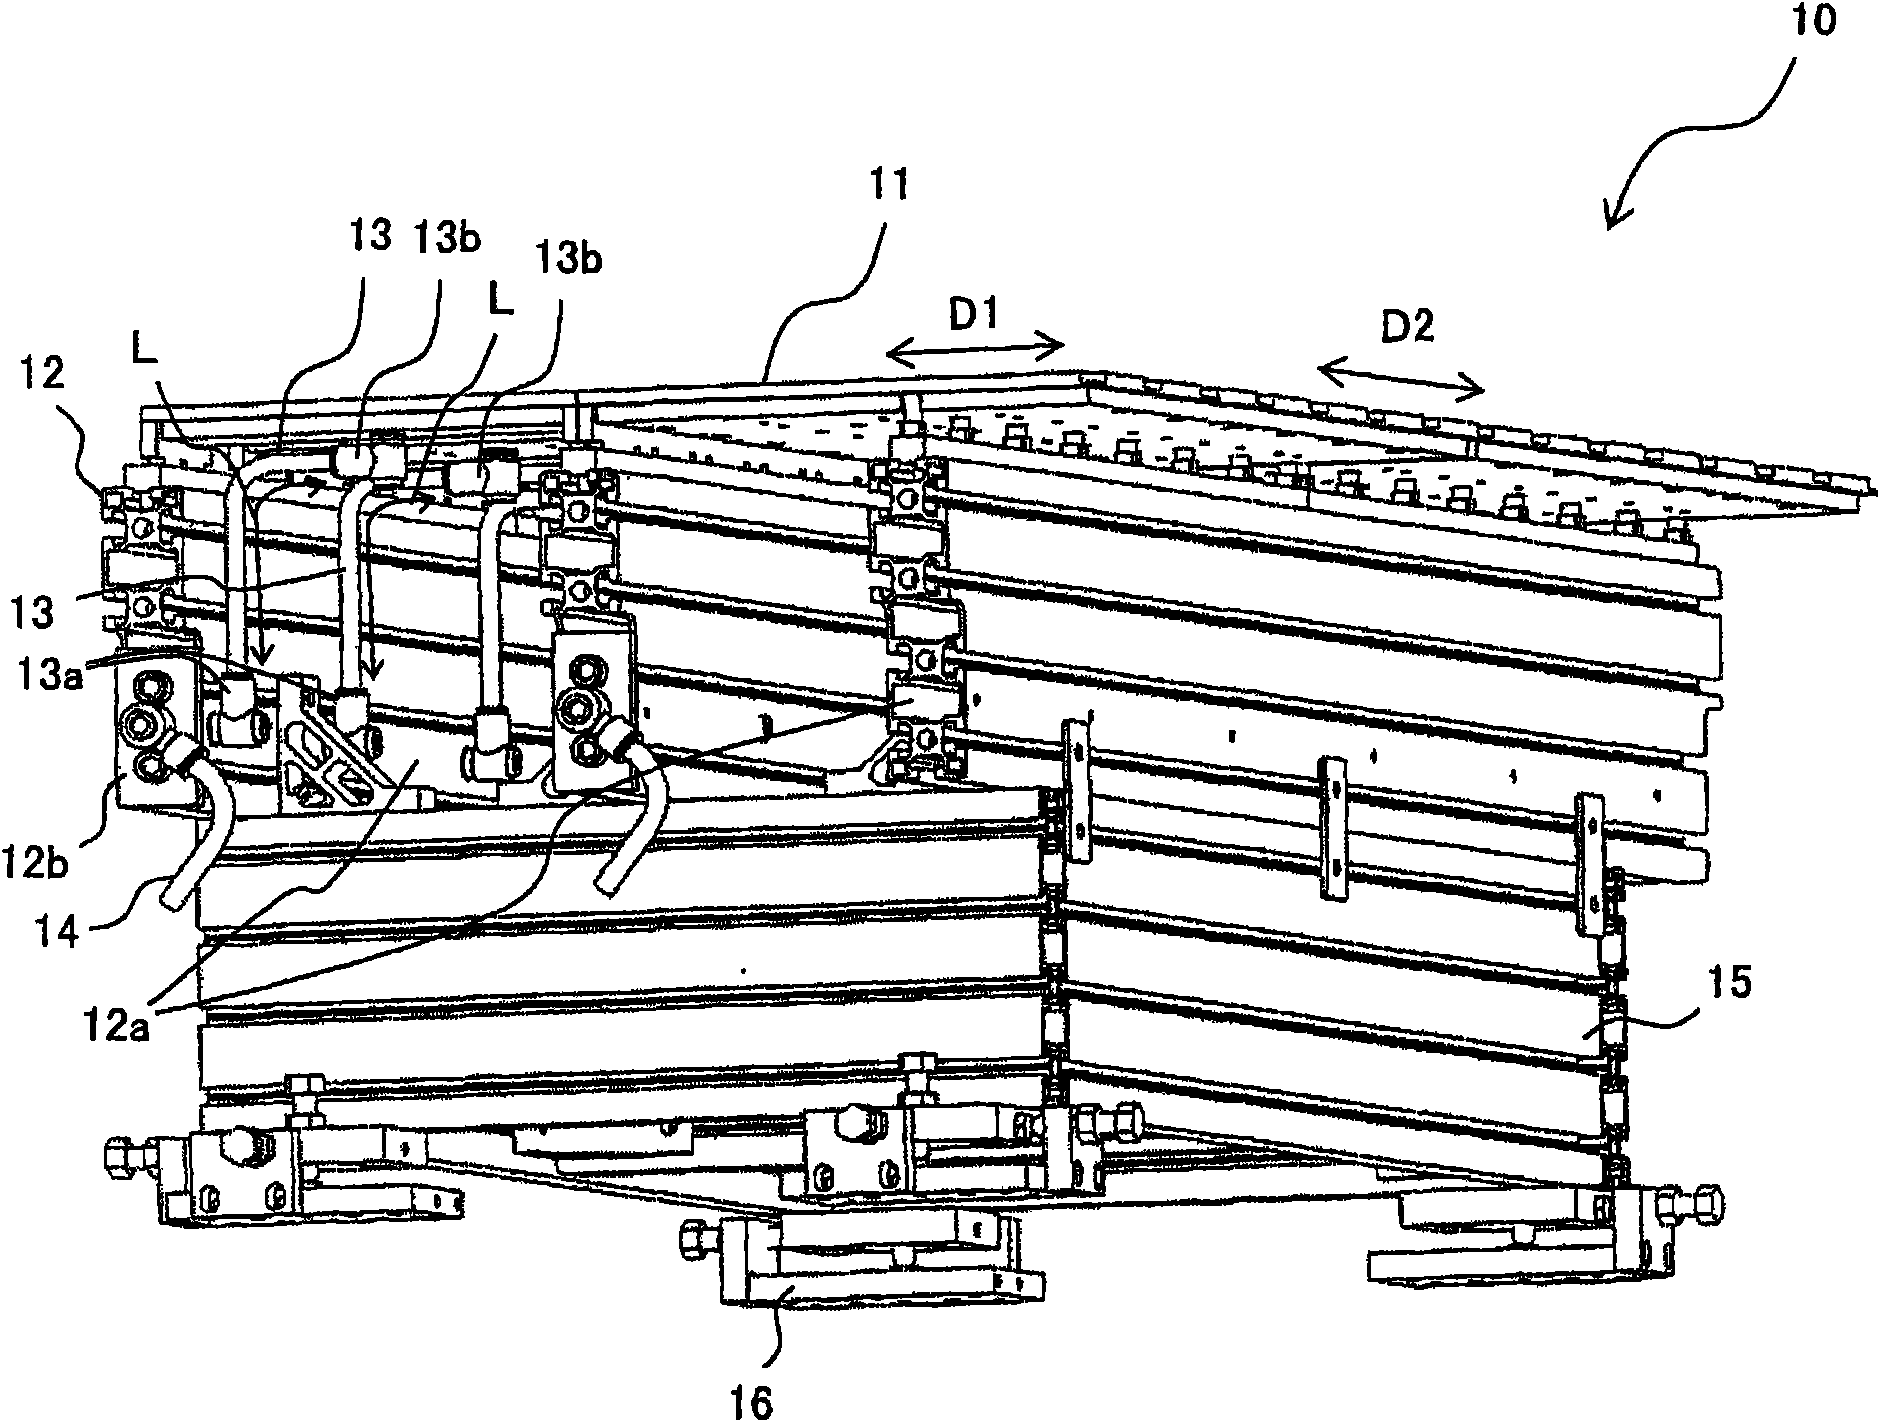 Substrate floating device